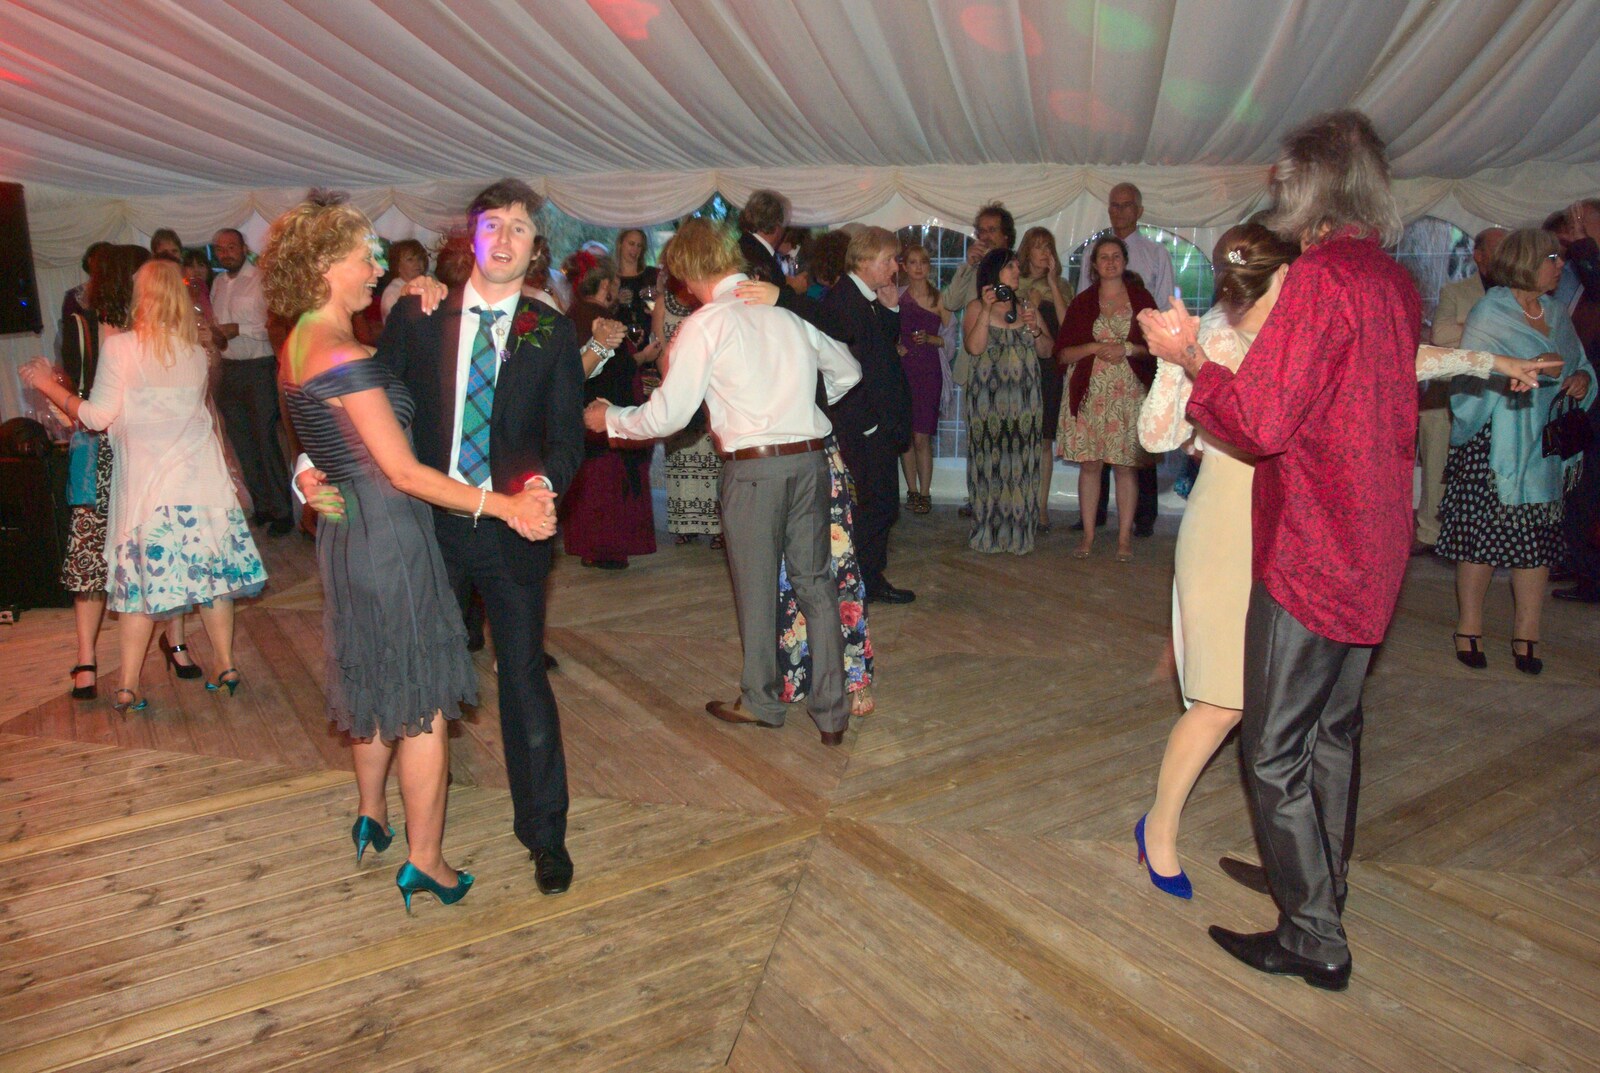 More dancing from Rob and Wilma's Wedding, Thornham and Thrandeston, Suffolk - 6th August 2011